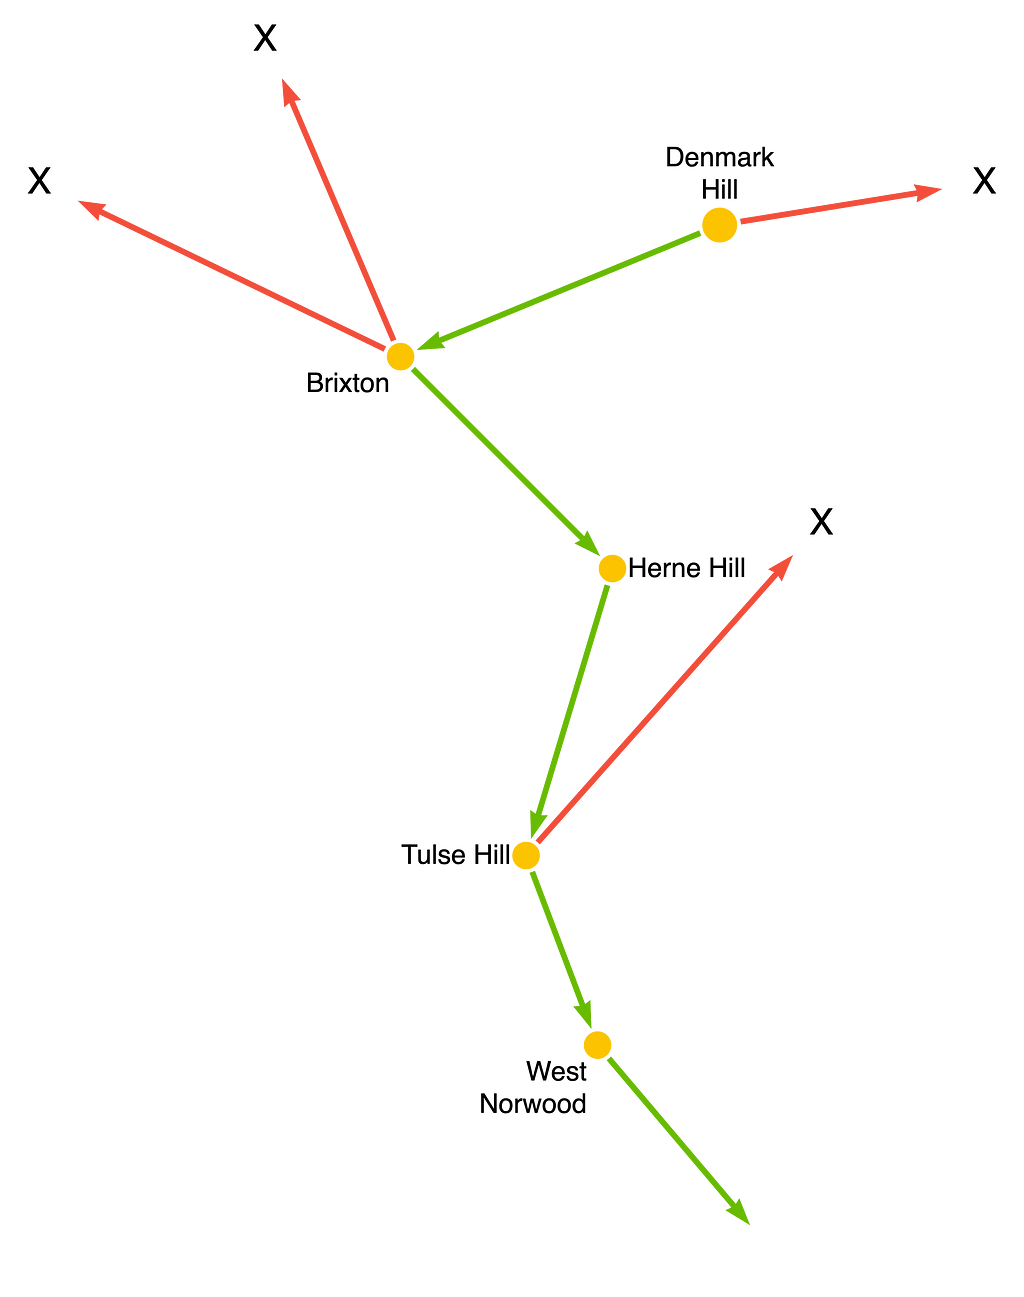 Diagram showing the relationships that are not traversed because they move too far away from the destination